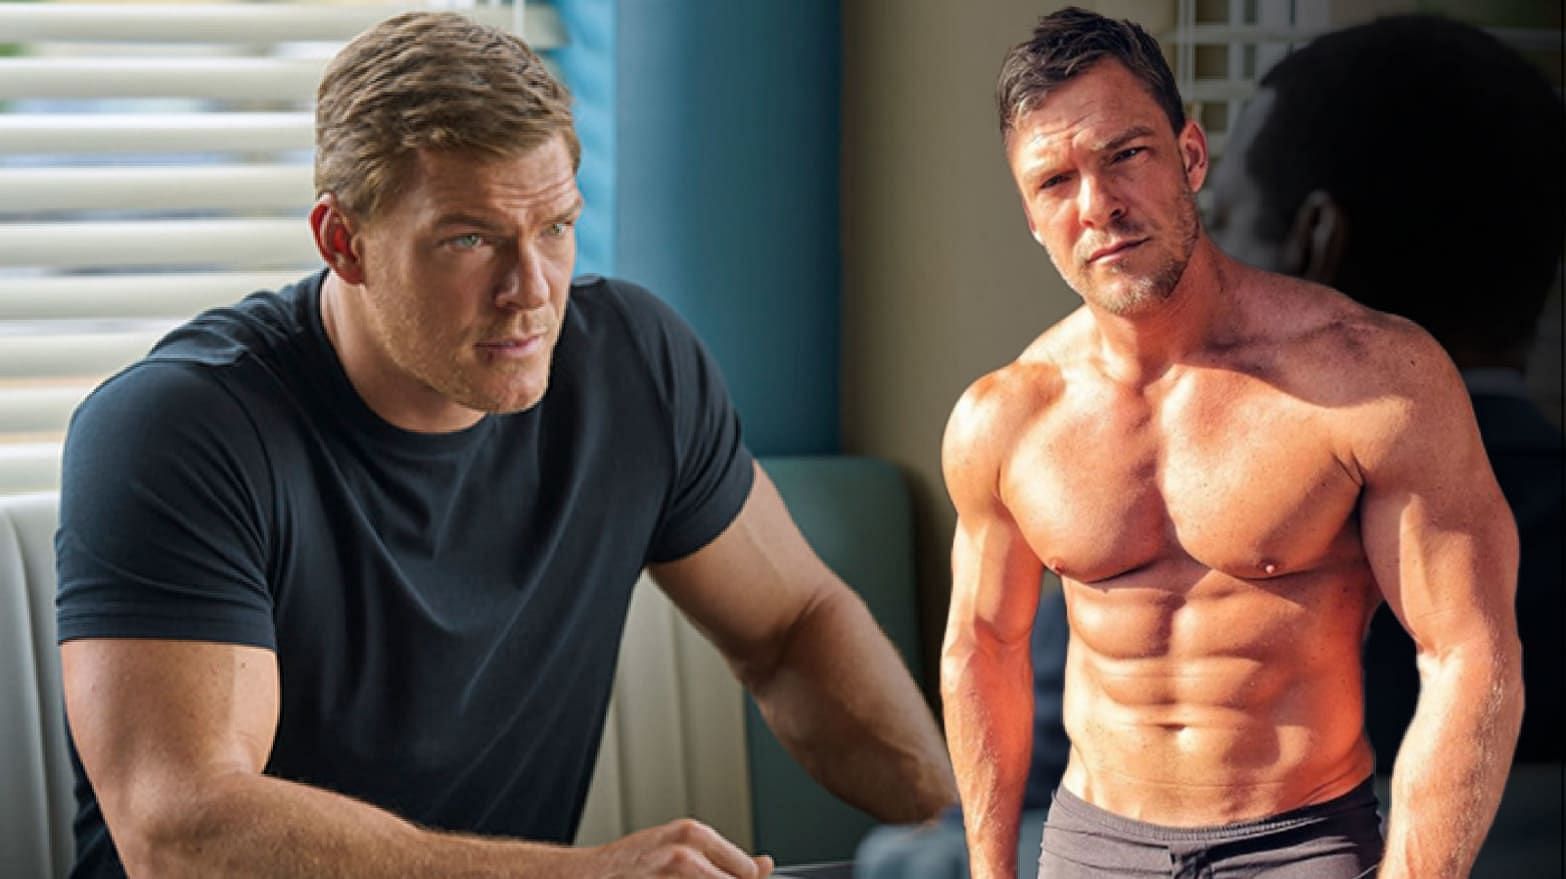 Alan Ritchson workout routine is no joke, Alan Ritchson is known for his impressive physique (Photo Illustration by Luis G. Rendon/The Daily Beast; Amazon Studios, Instagram)